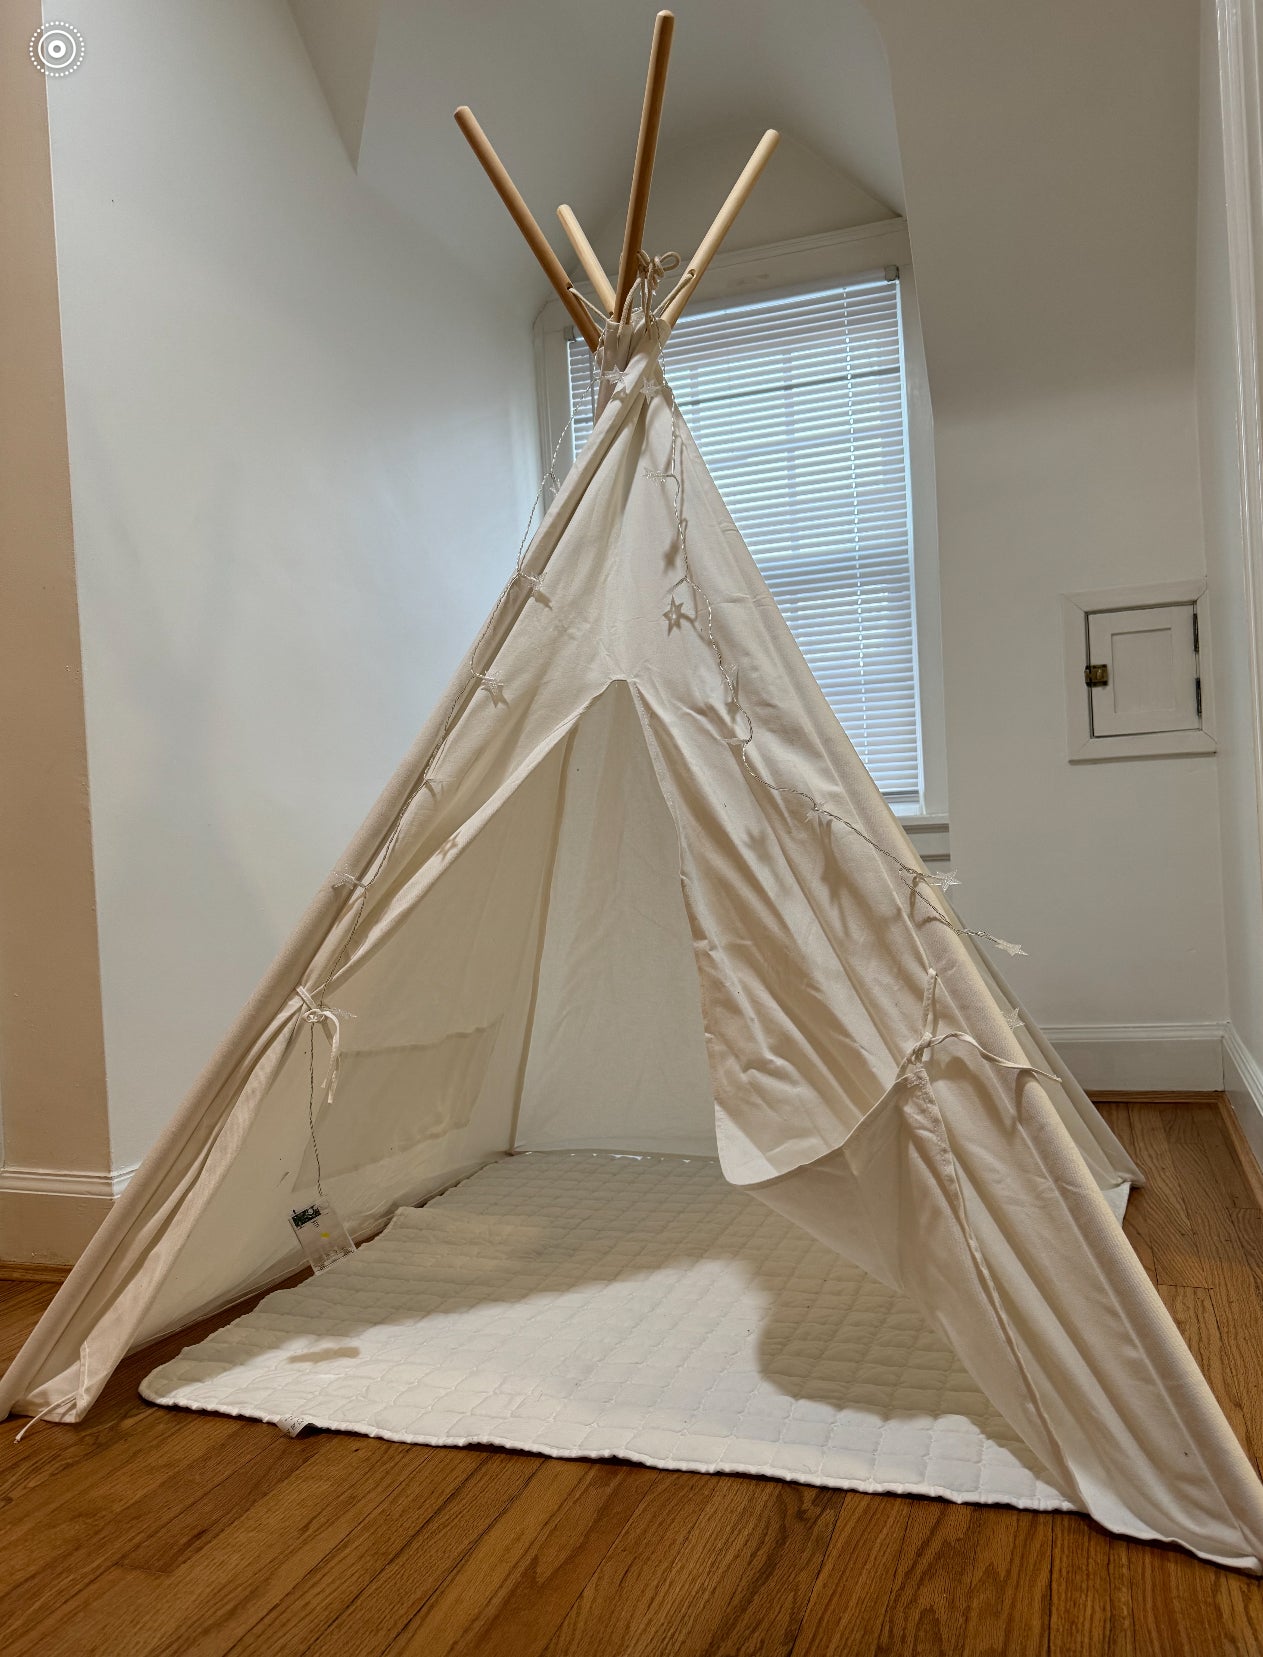 *REDUCED* Tiny Land Teepee Tent with Lights